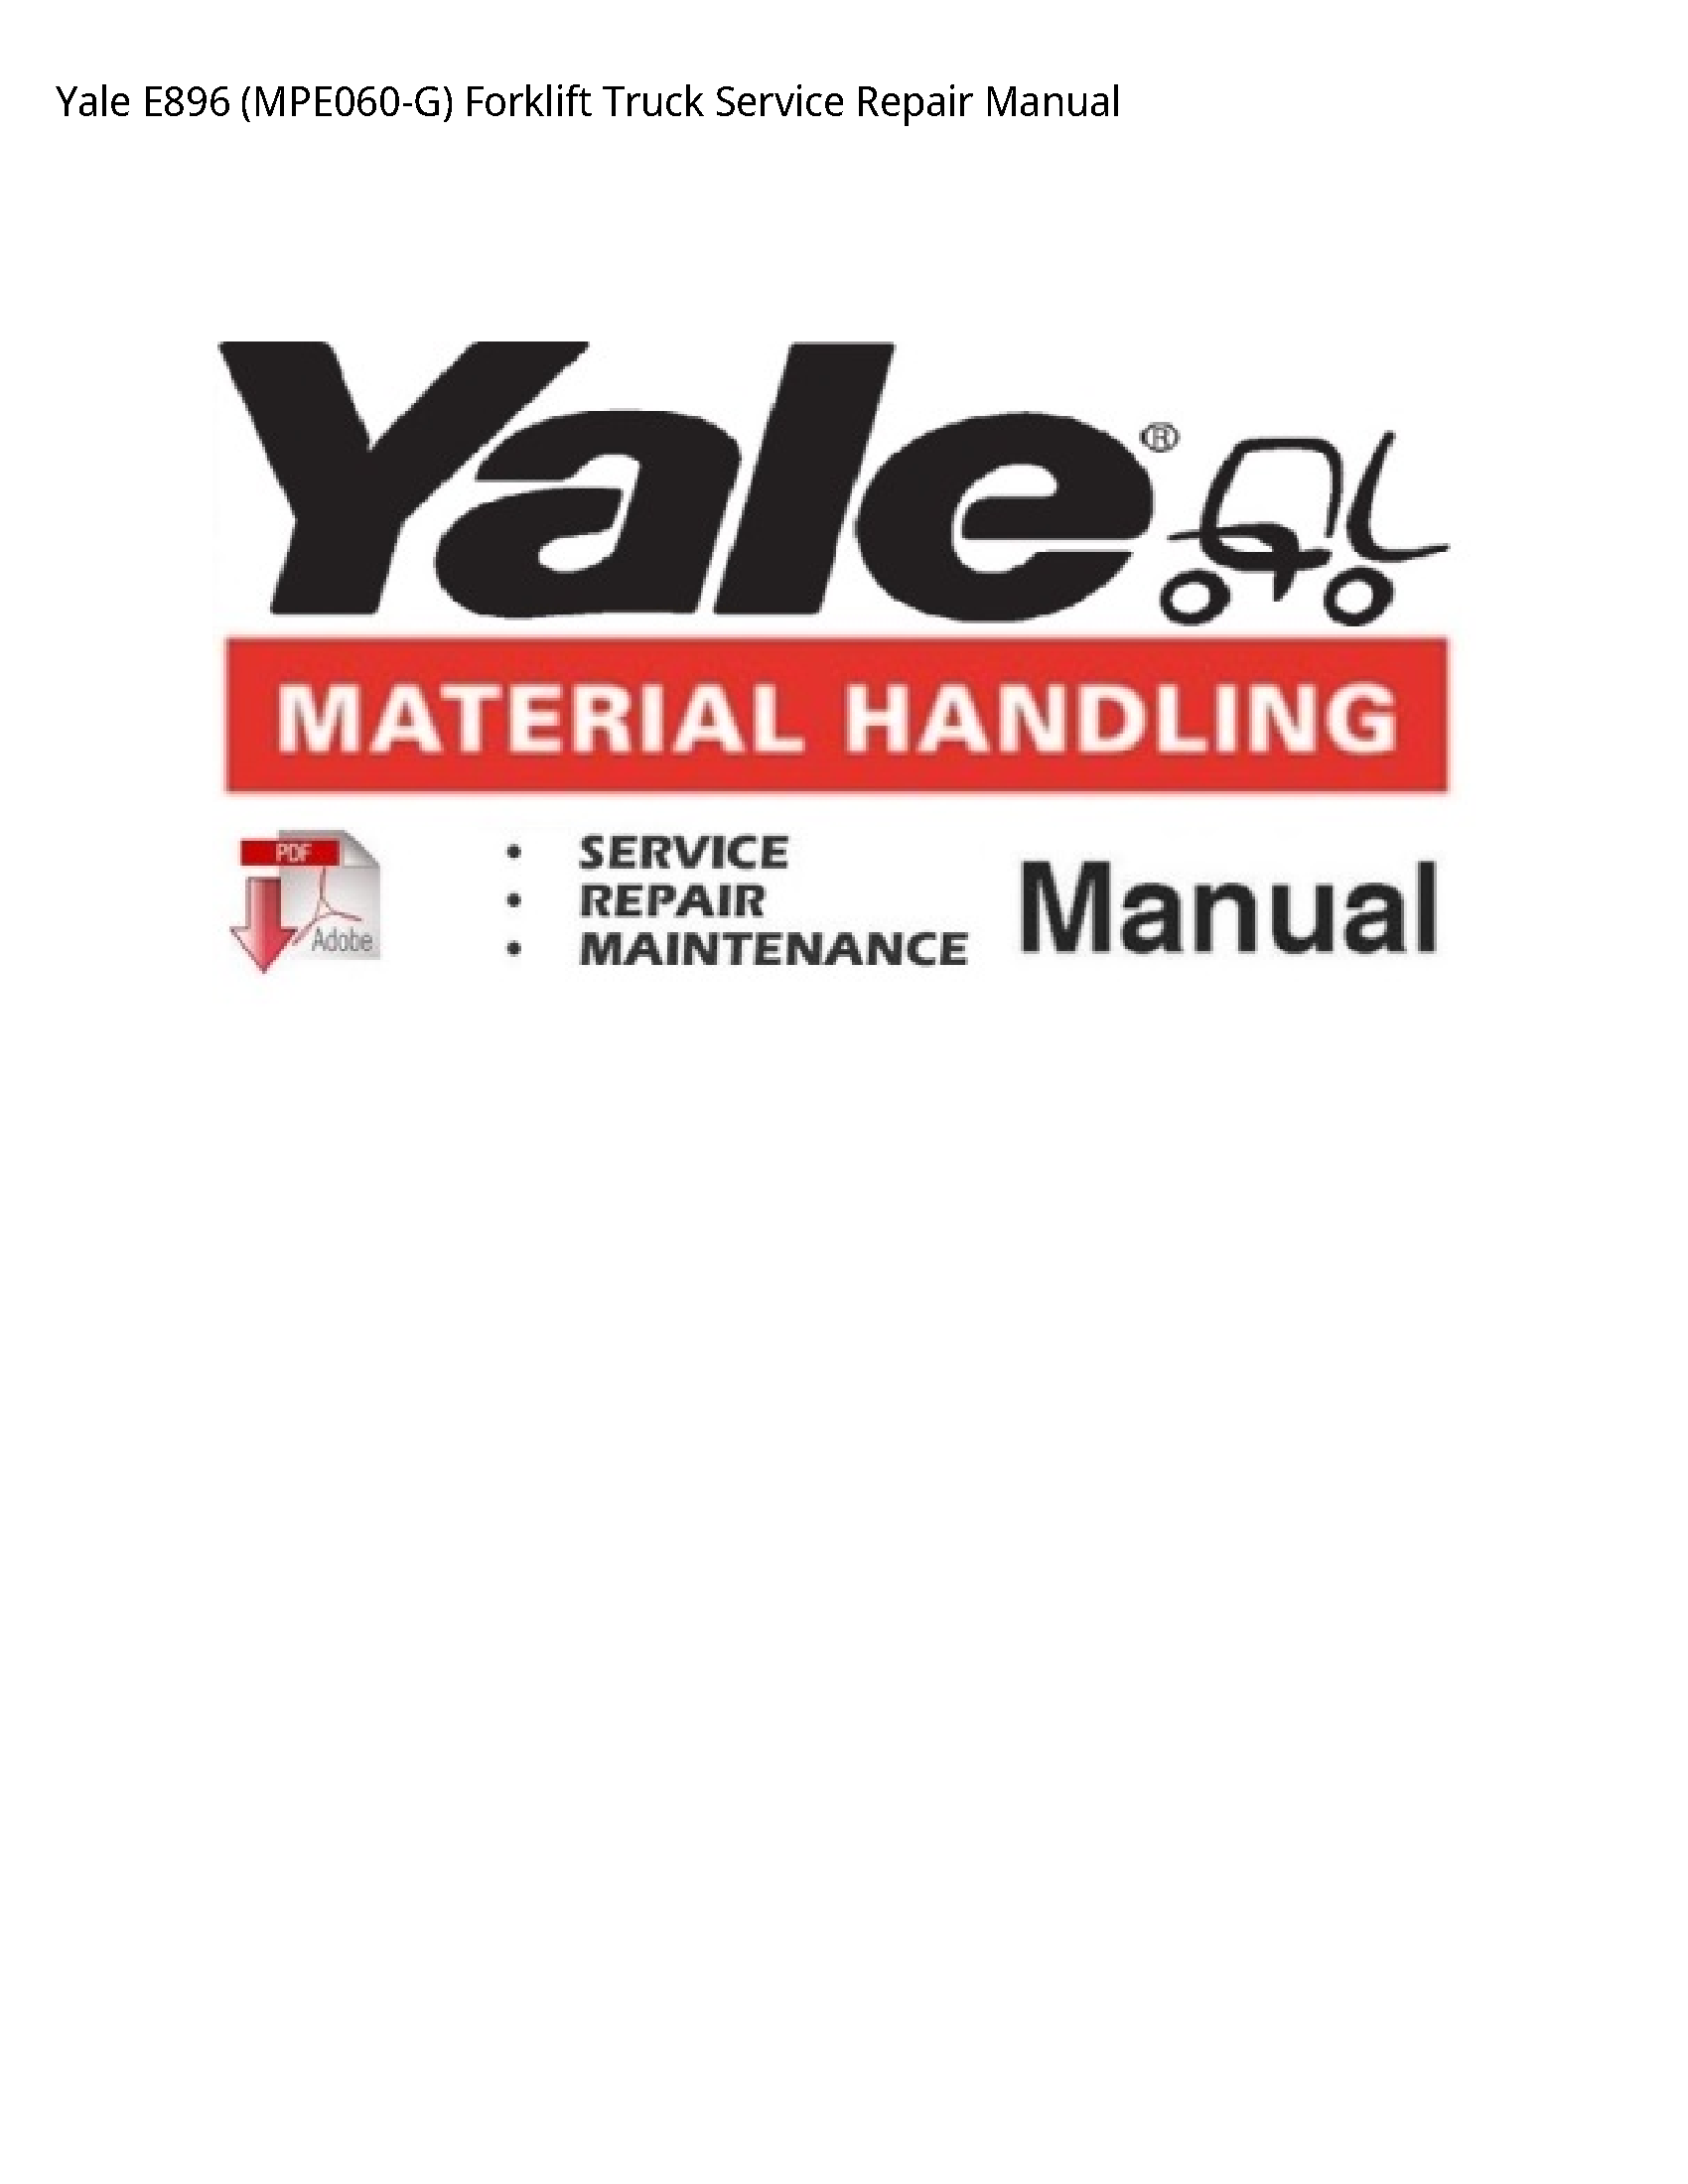 Yale E896 Forklift Truck manual